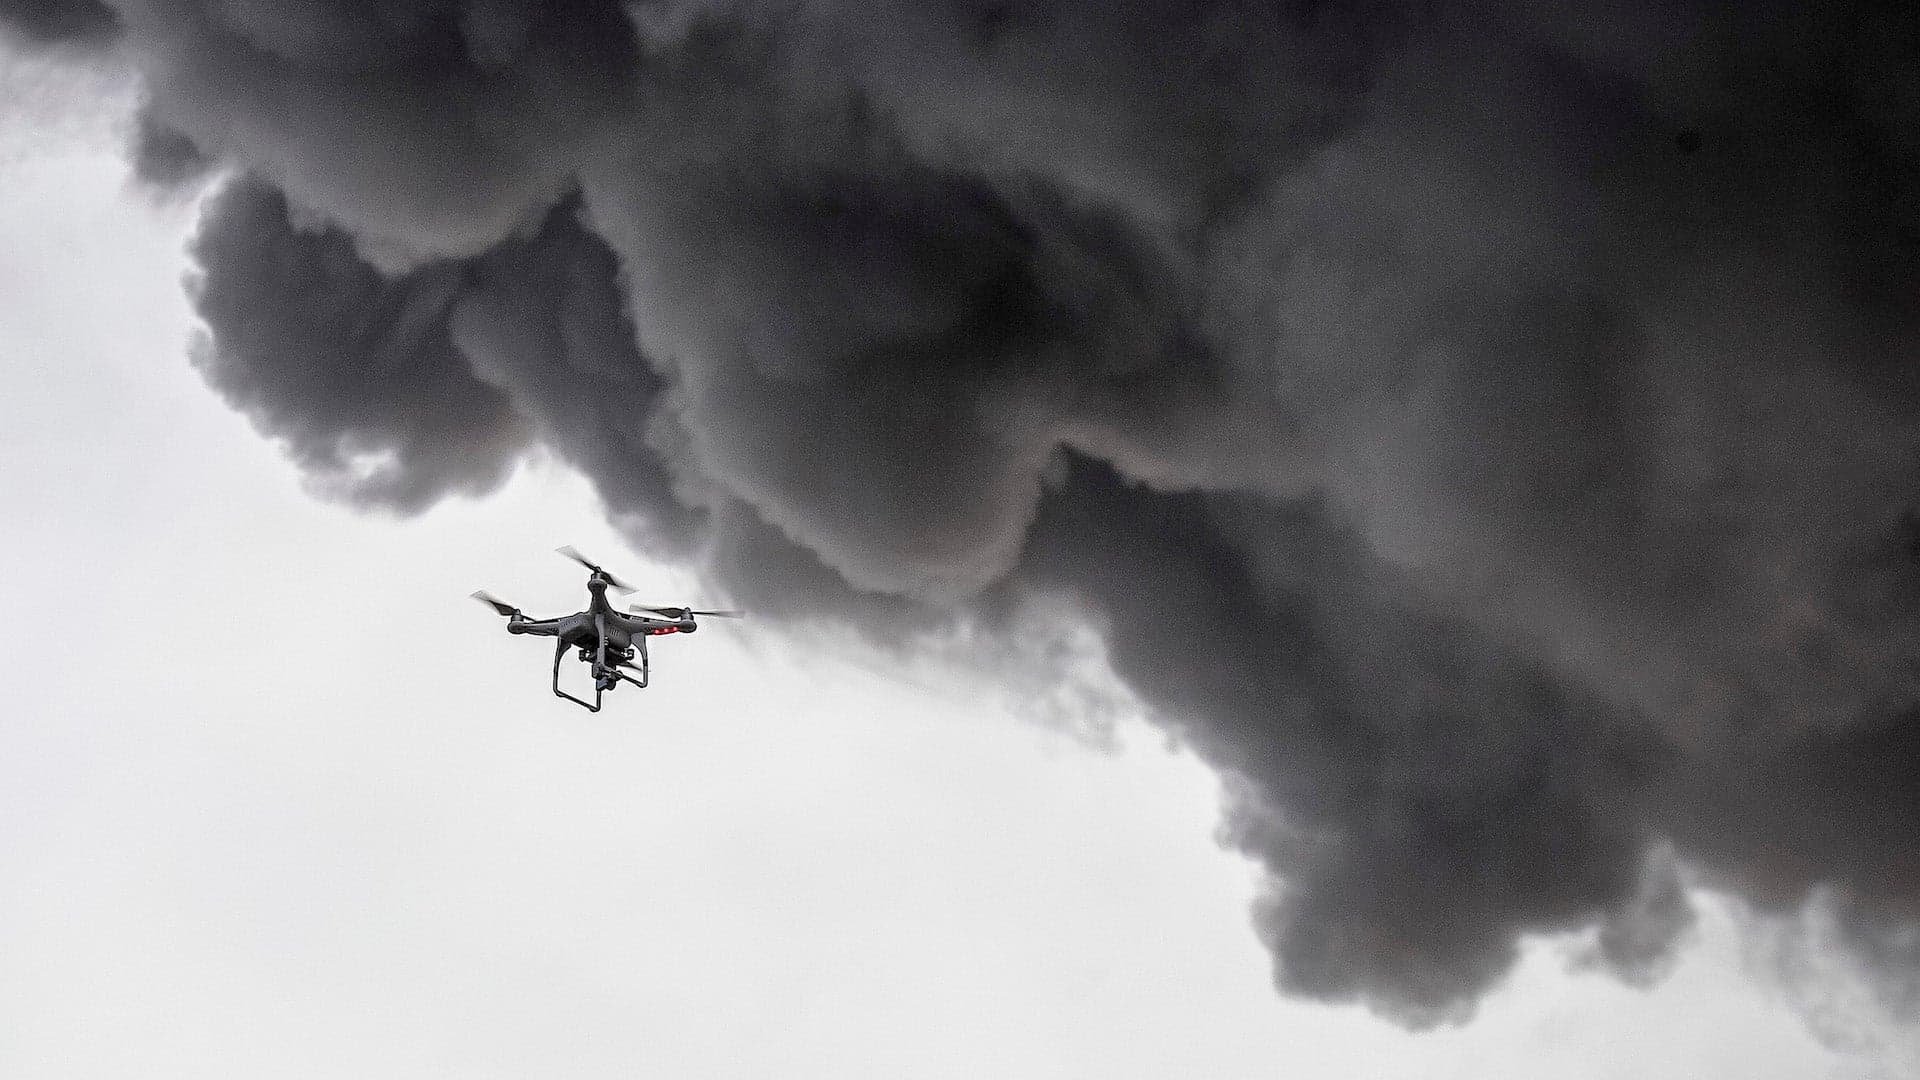 The Polish City of Katowice is Using a Drone to Combat Smog